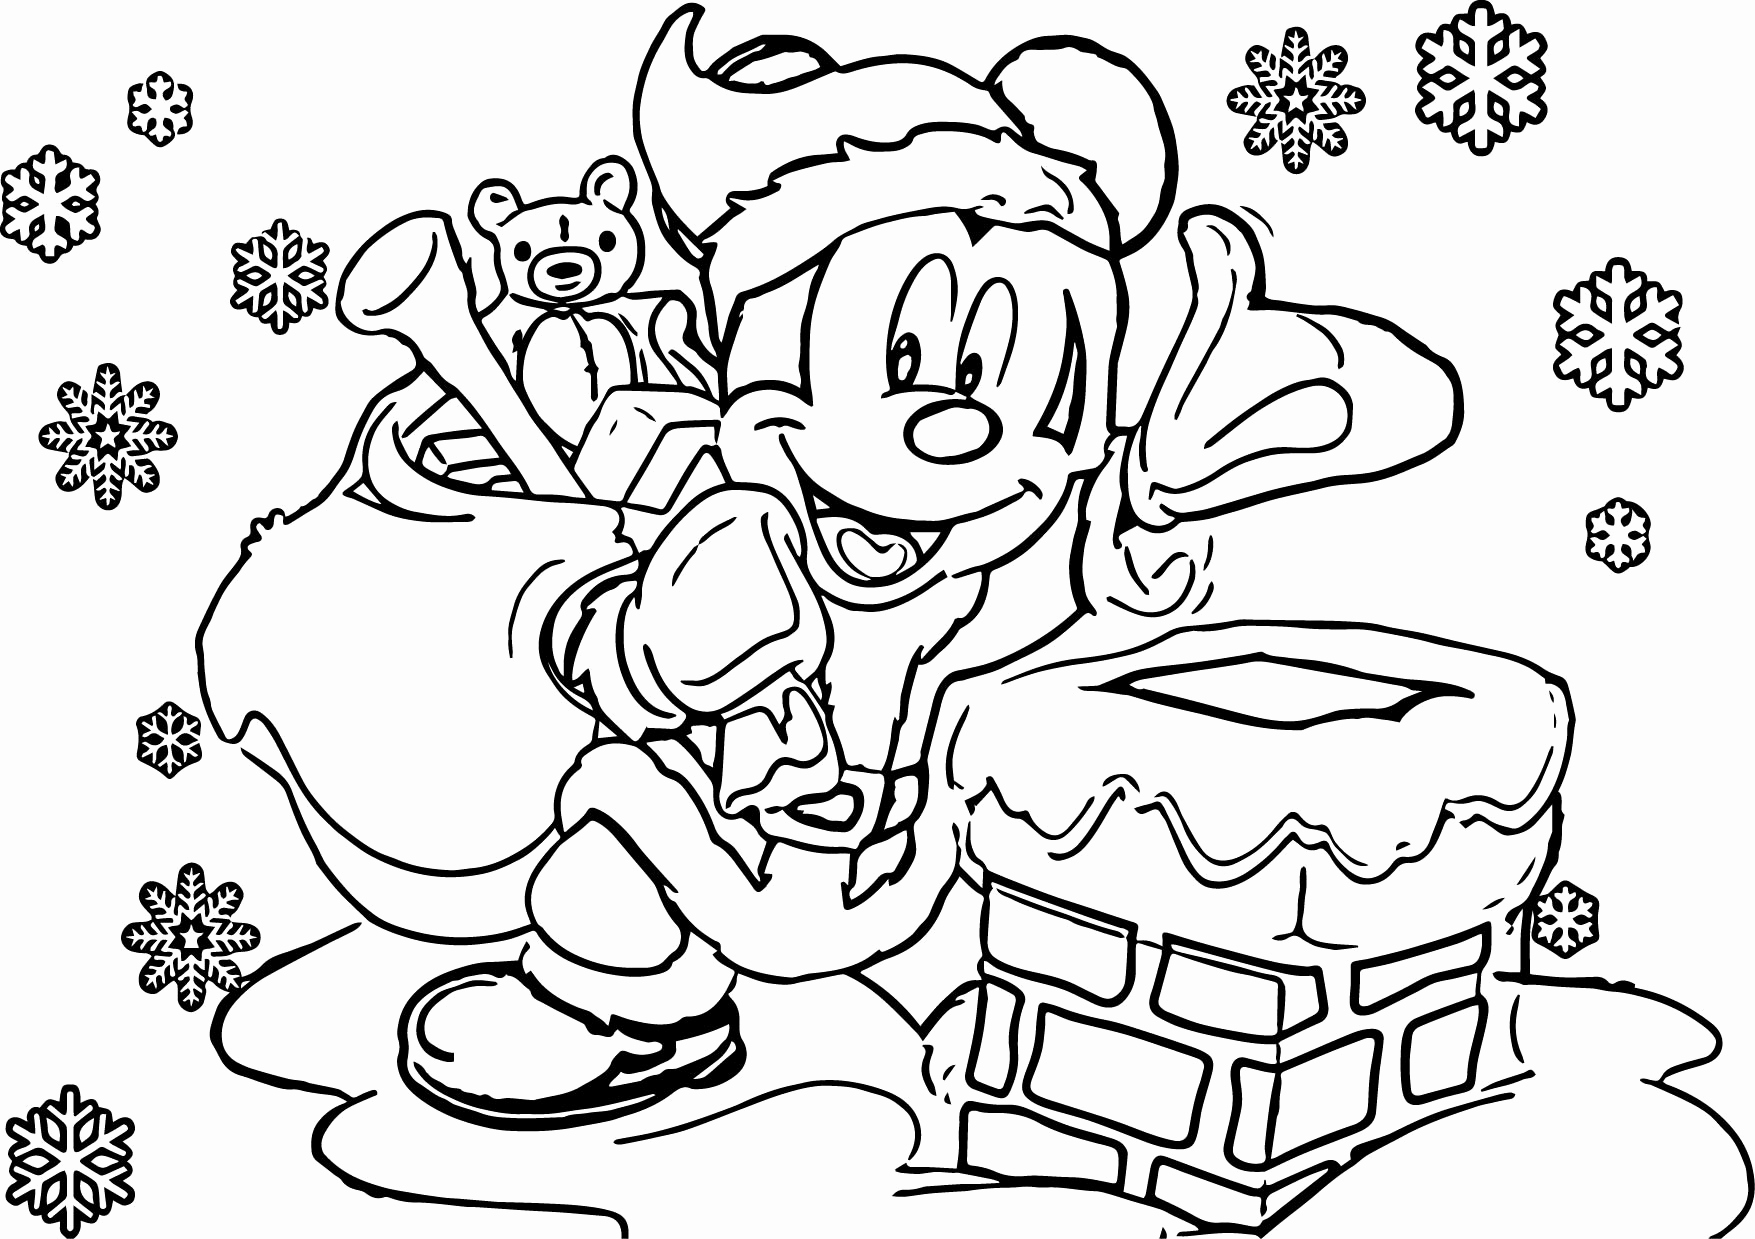 Free Printable Religious Christmas Coloring Pages at GetDrawings | Free